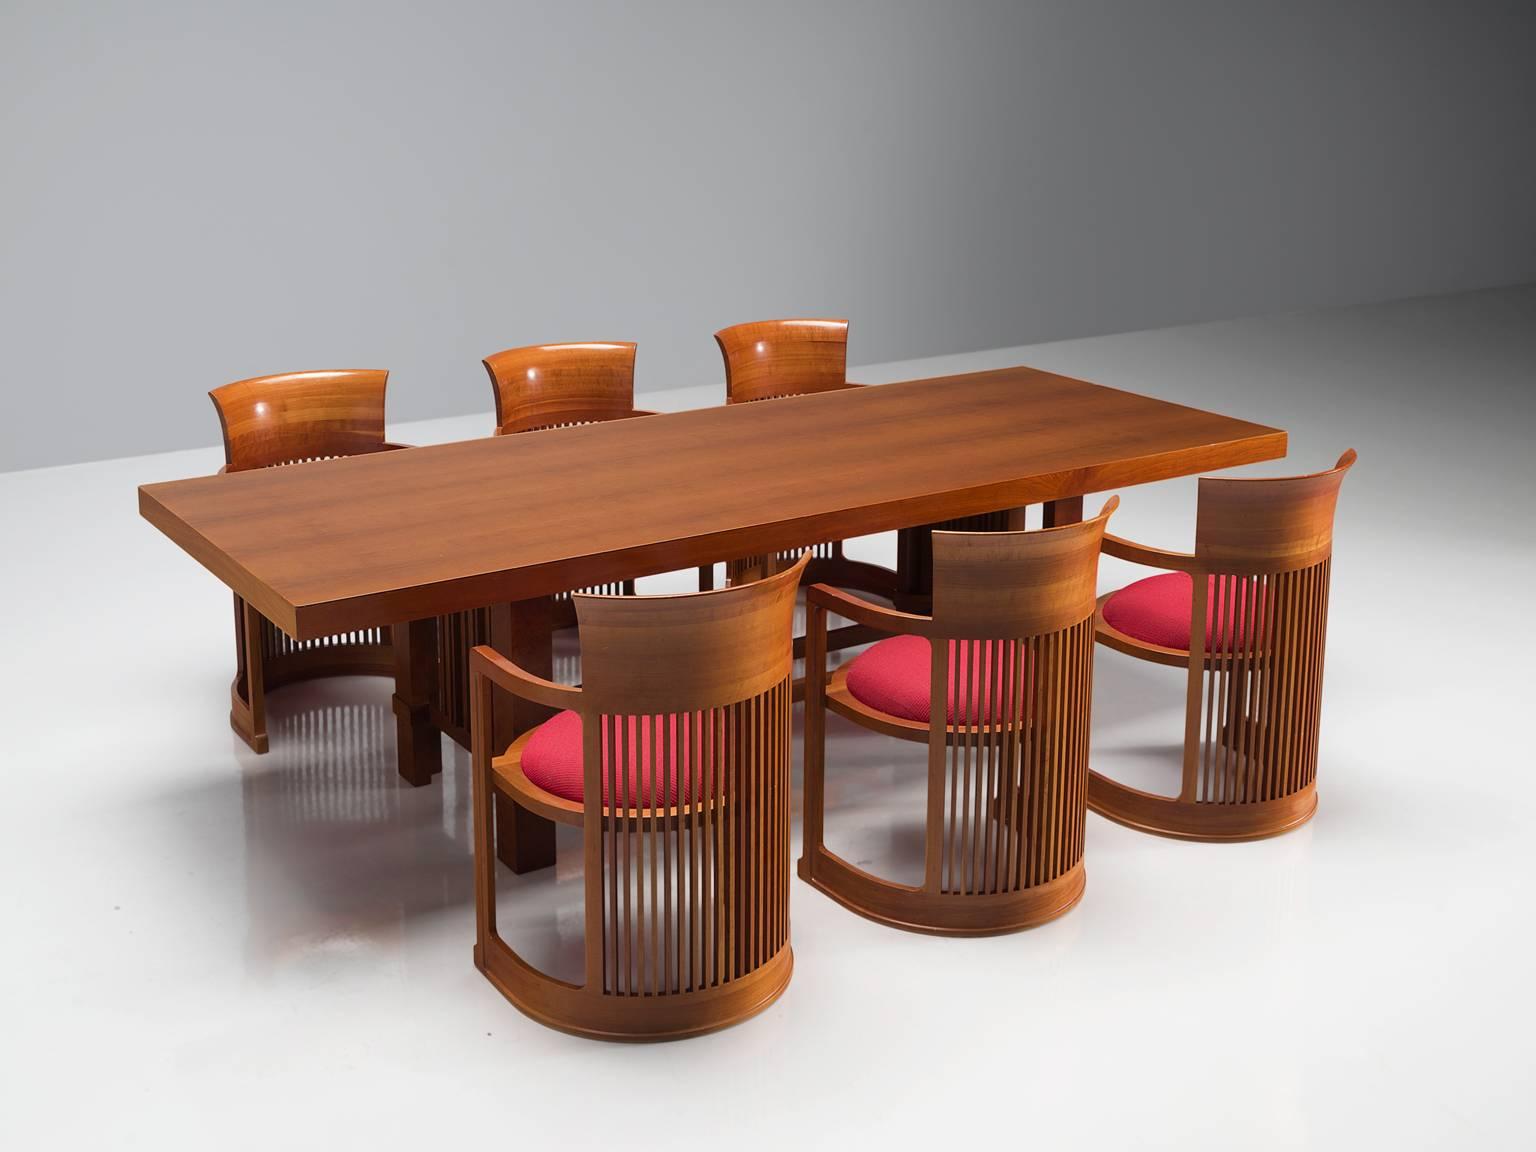 Frank Lloyd Wright for Cassina, 608 Taliesin table and six 'barrel' chairs, cherry, red fabric, design 1917, production 1989, United States,

This Taliesin table is designed by Frank Lloyd Wright and produced by Cassina. The table has an